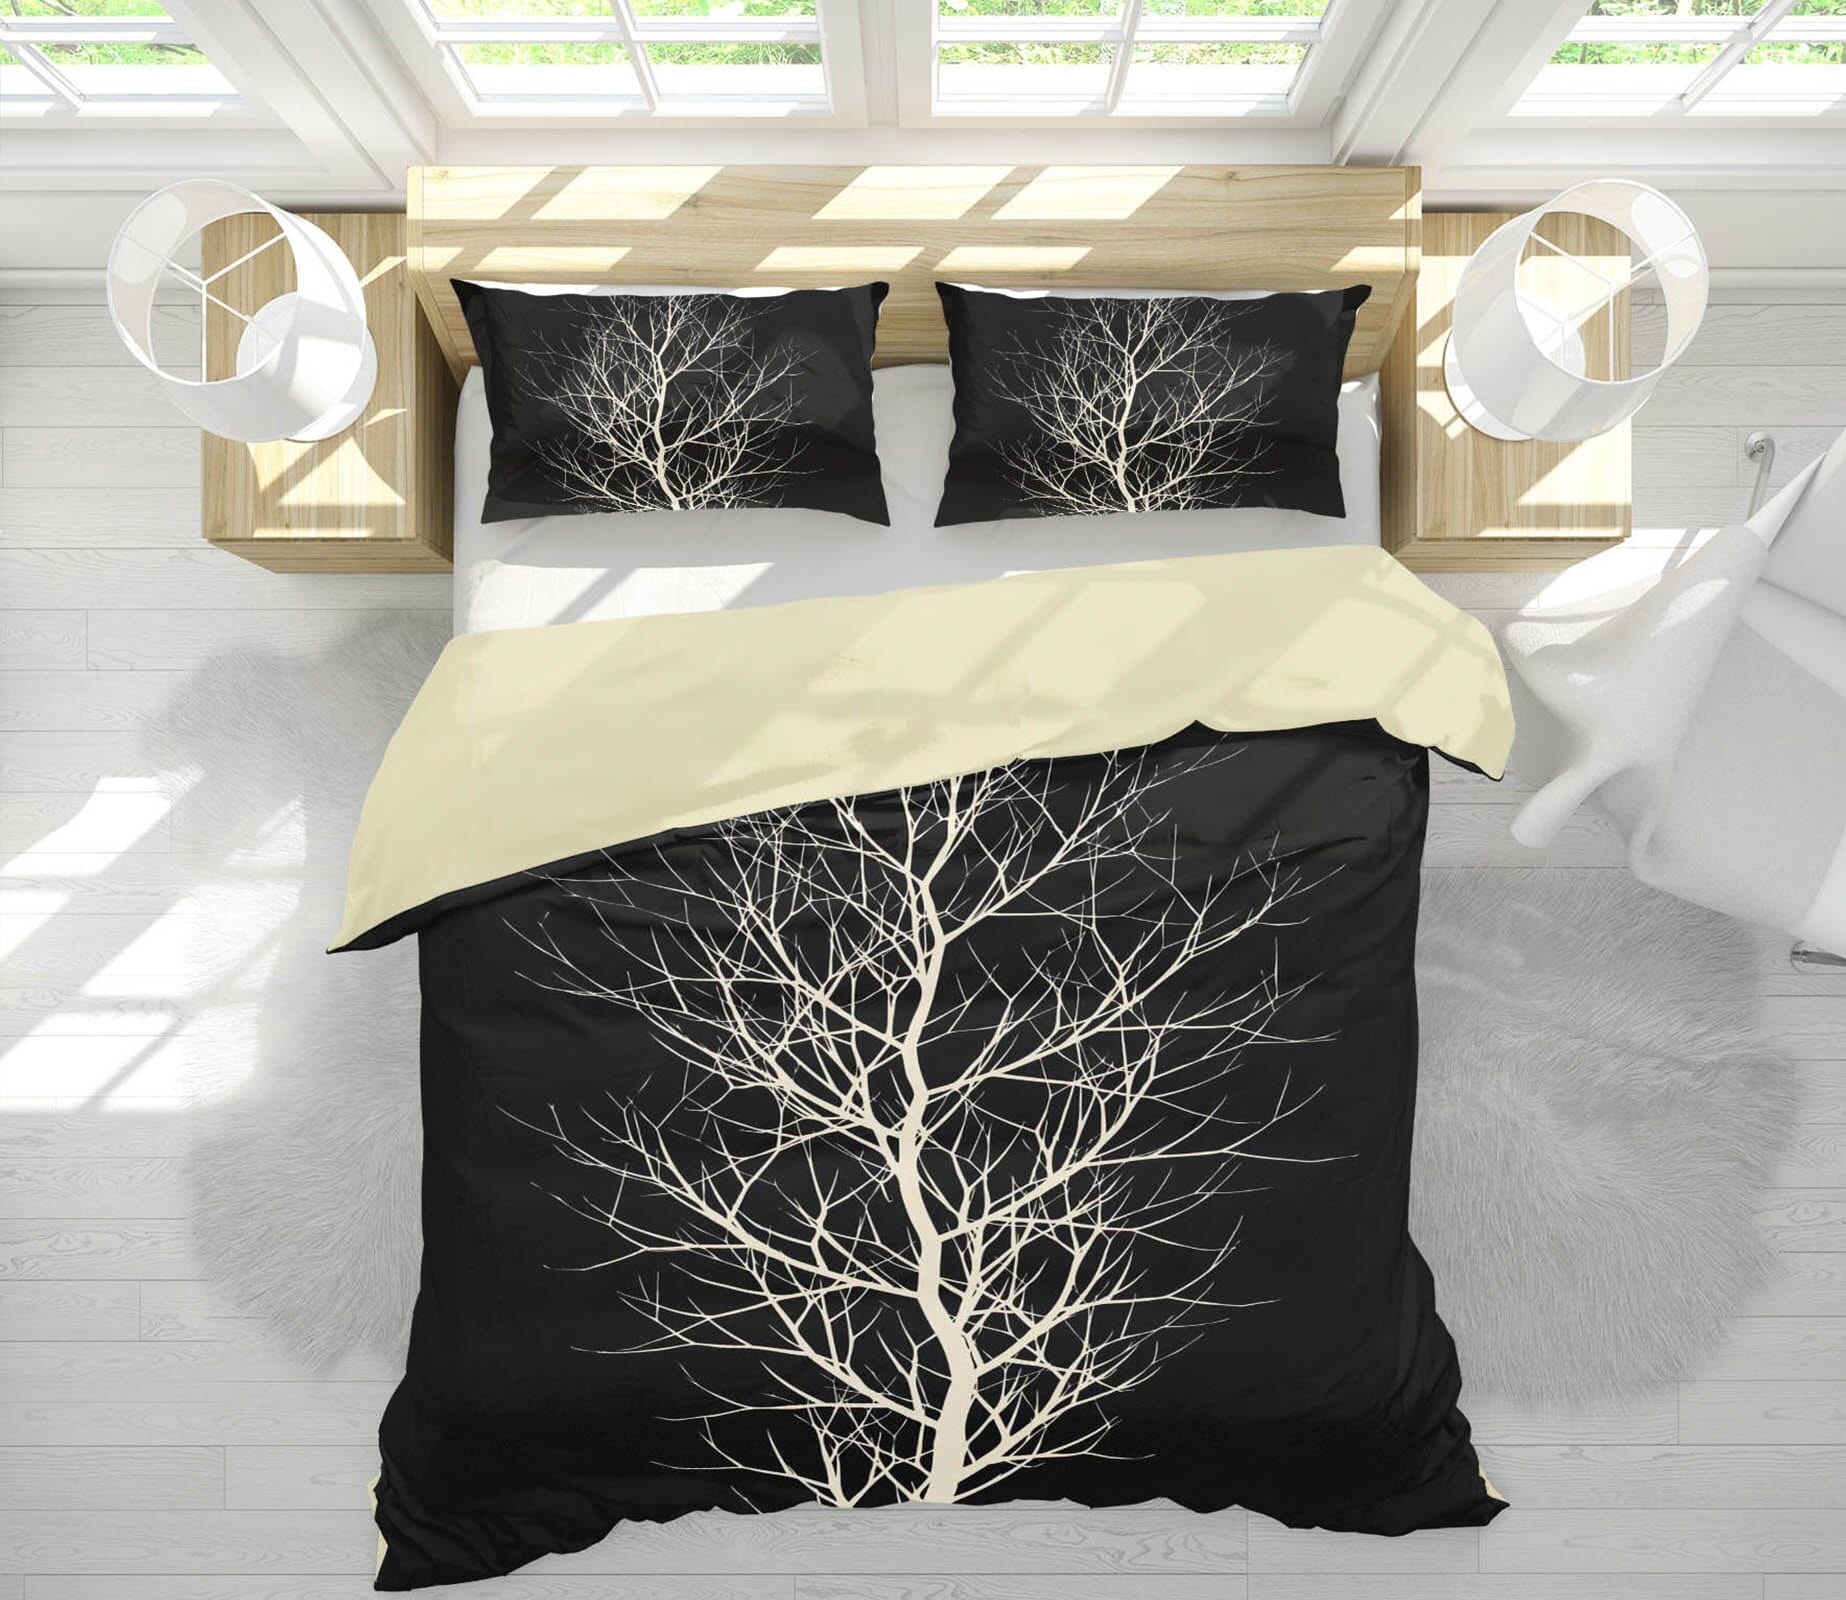 3D The White Tree 2122 Boris Draschoff Bedding Bed Pillowcases Quilt Quiet Covers AJ Creativity Home 